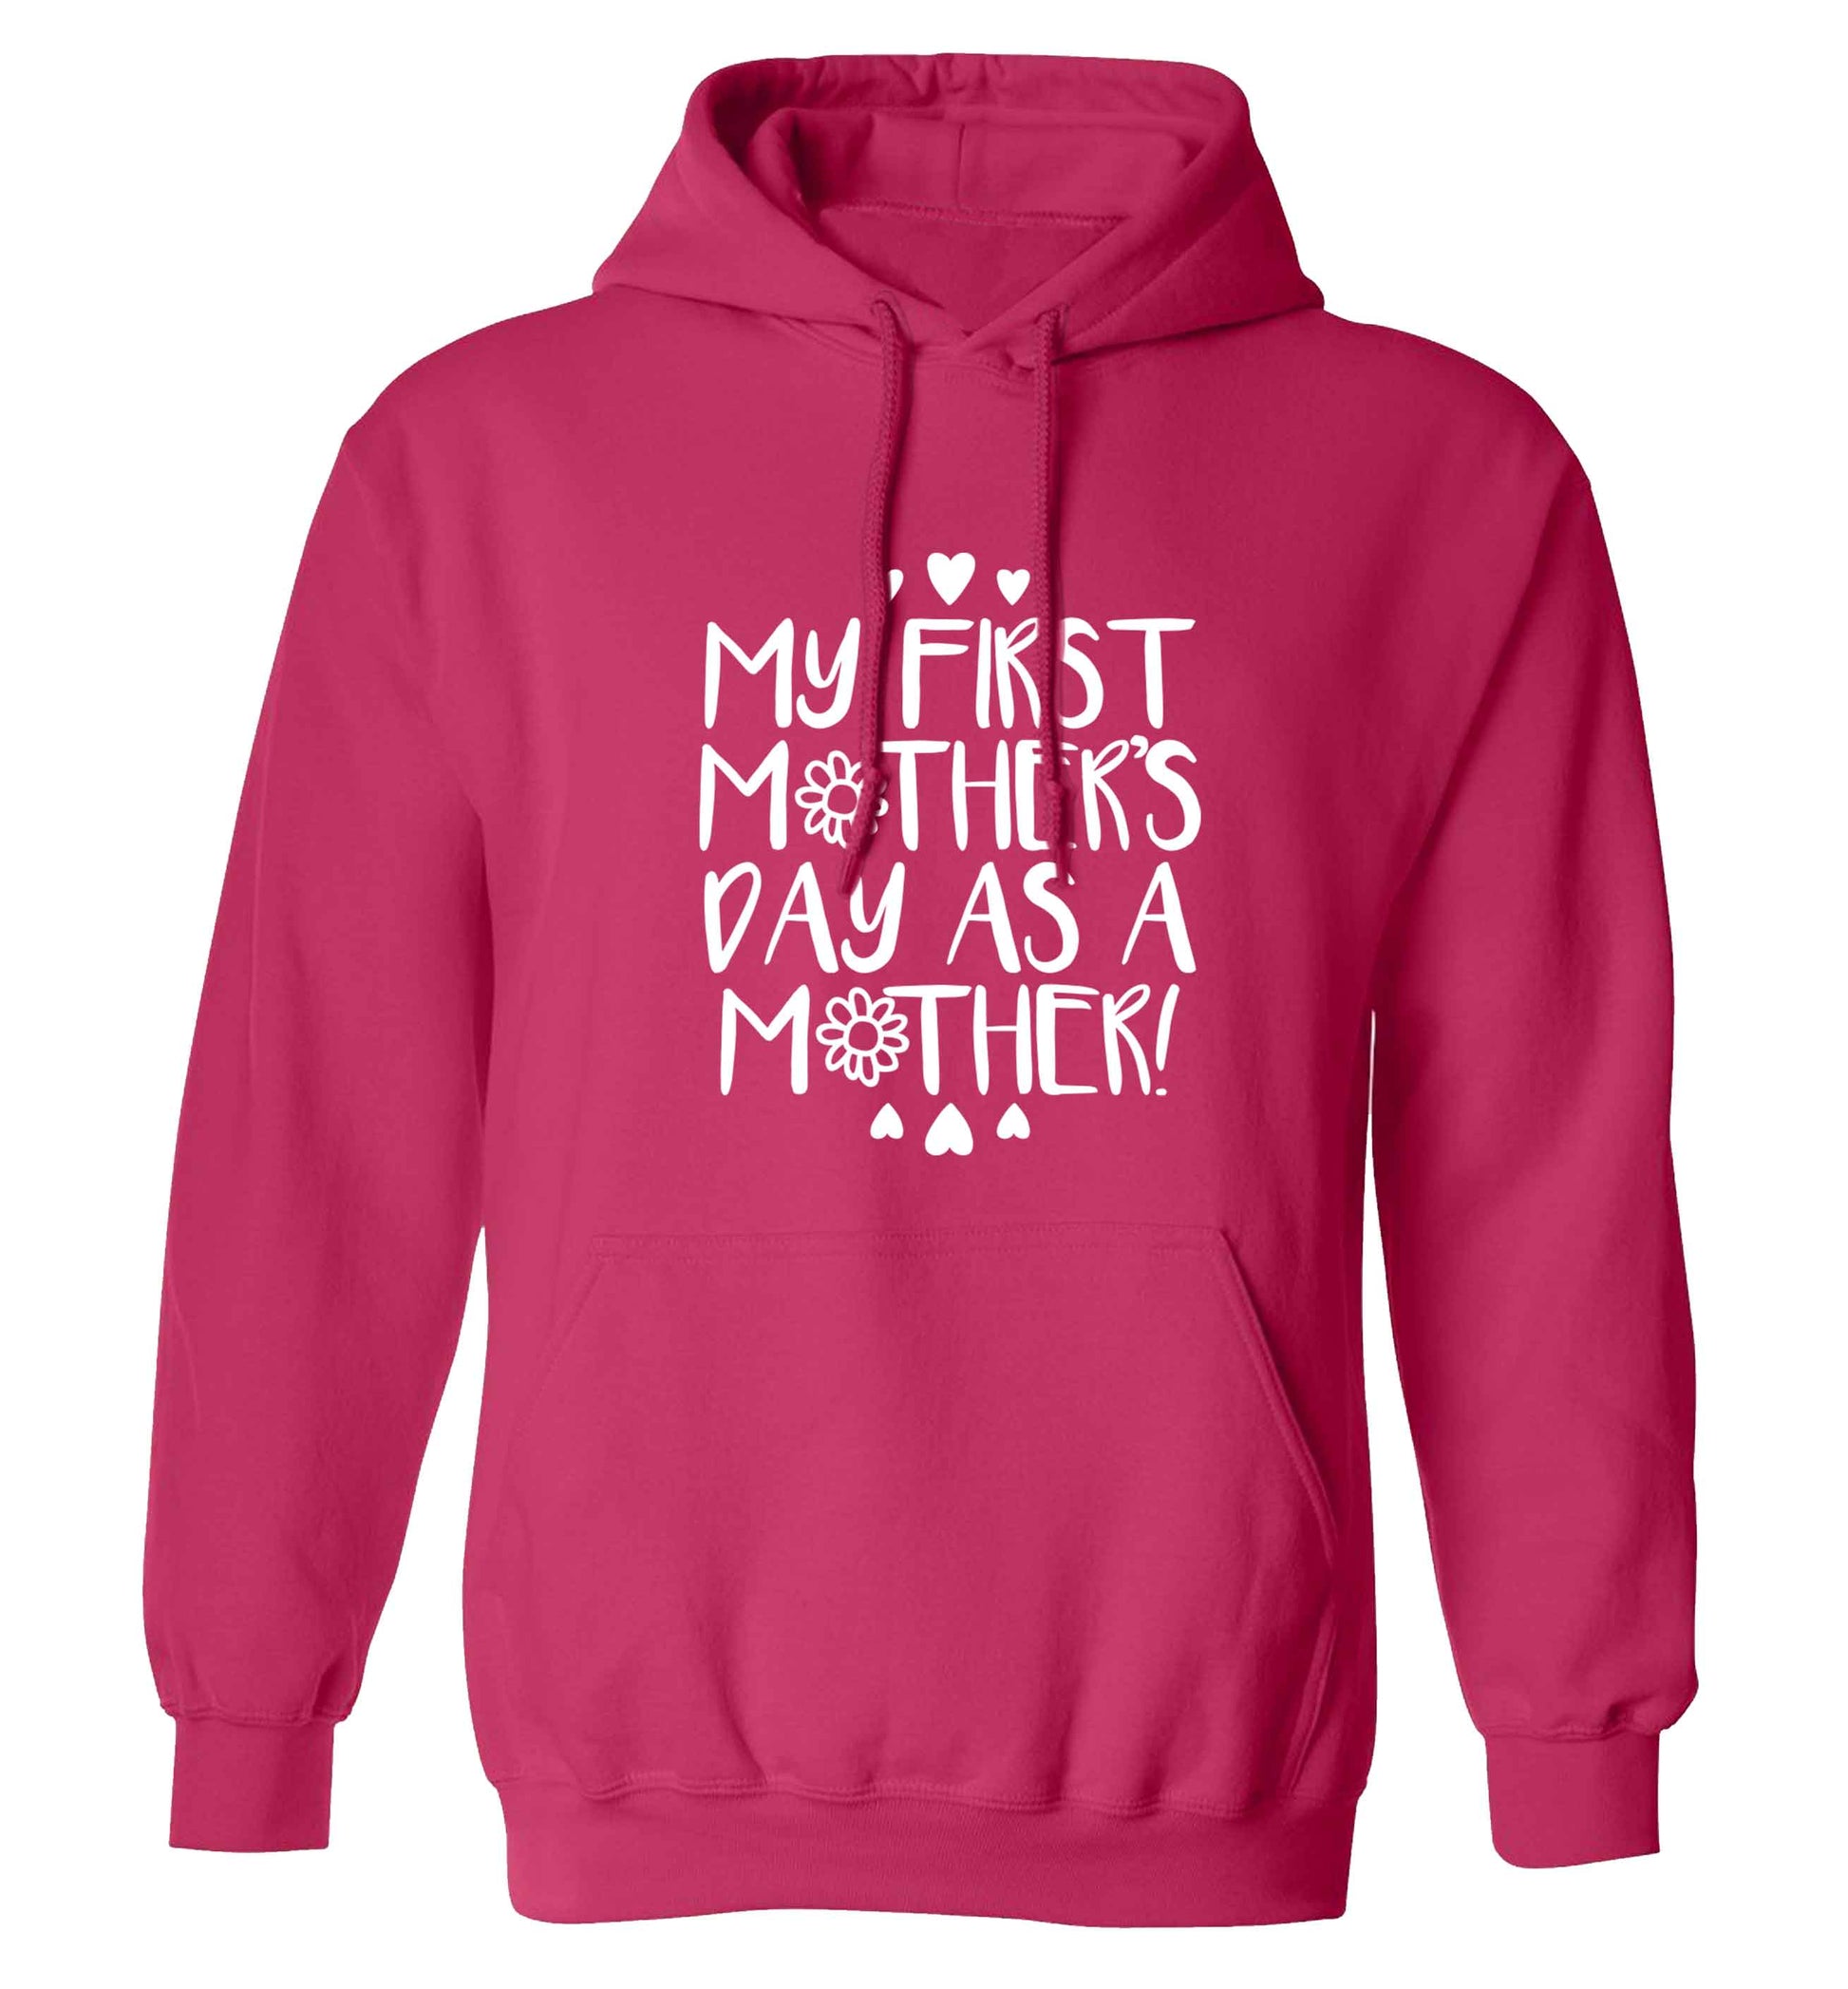 It's my first mother's day as a mother adults unisex pink hoodie 2XL